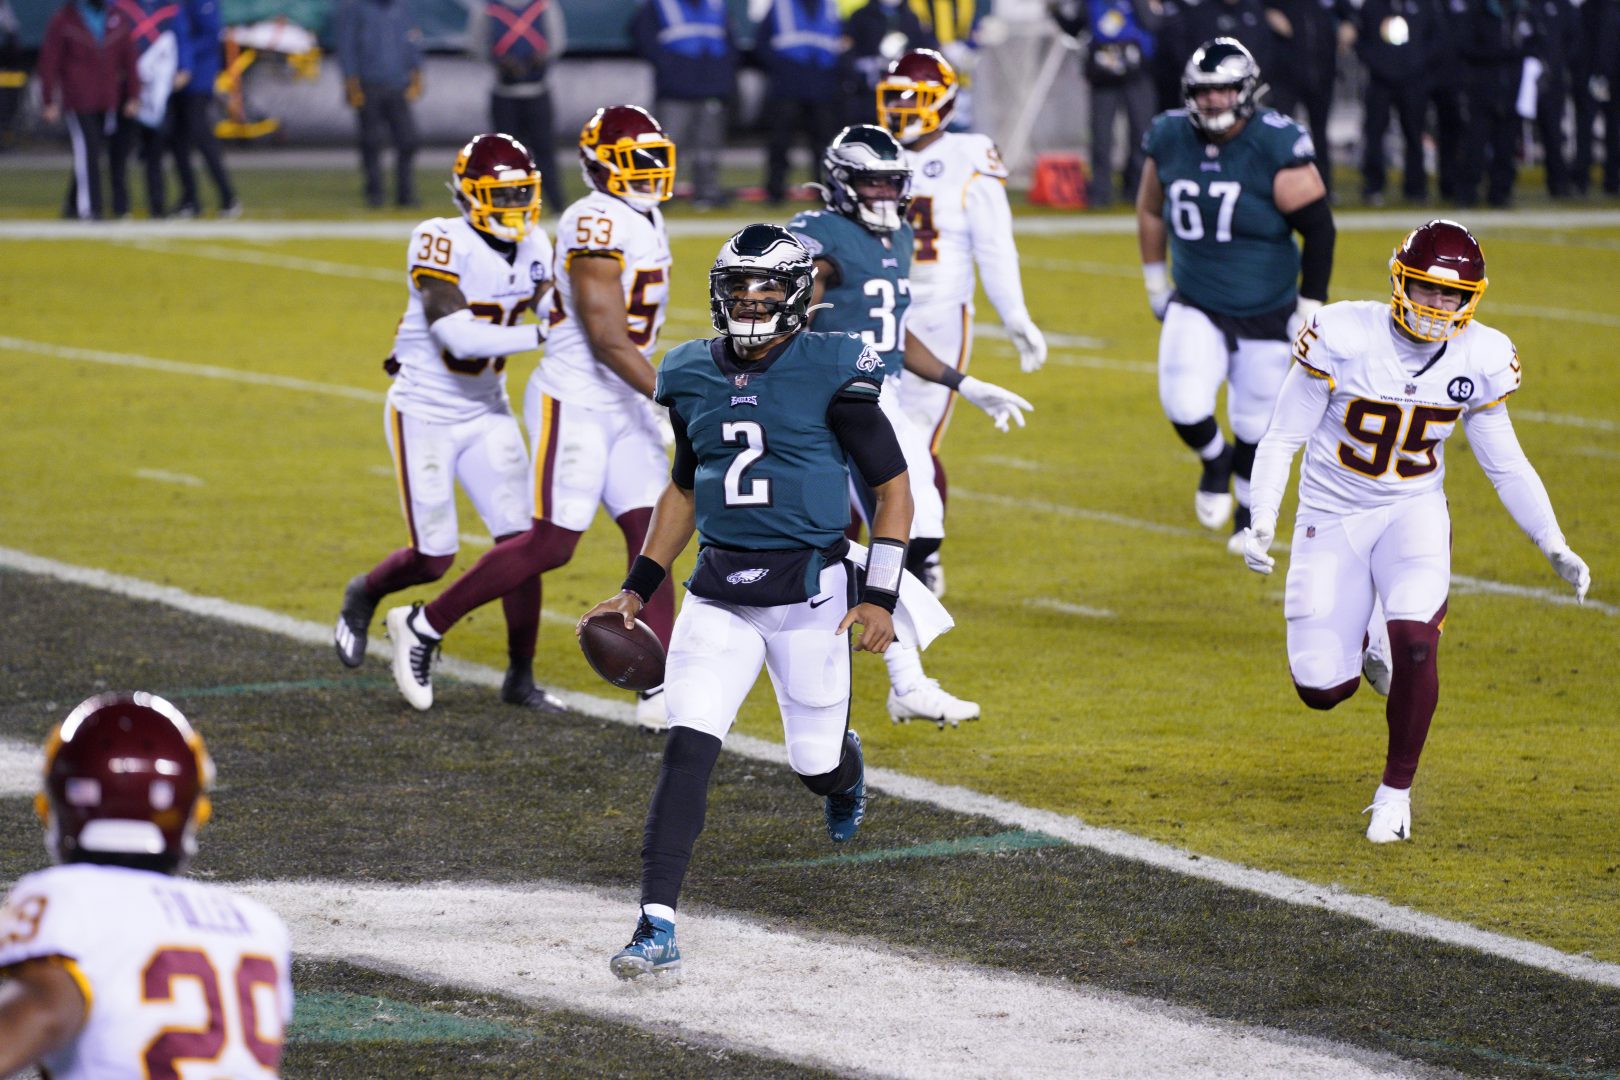 Philadelphia Eagles' Jalen Hurts (2) scores a touchdown during the first half of an NFL football game against the Washington Football Team, Sunday, Jan. 3, 2021, in Philadelphia. 